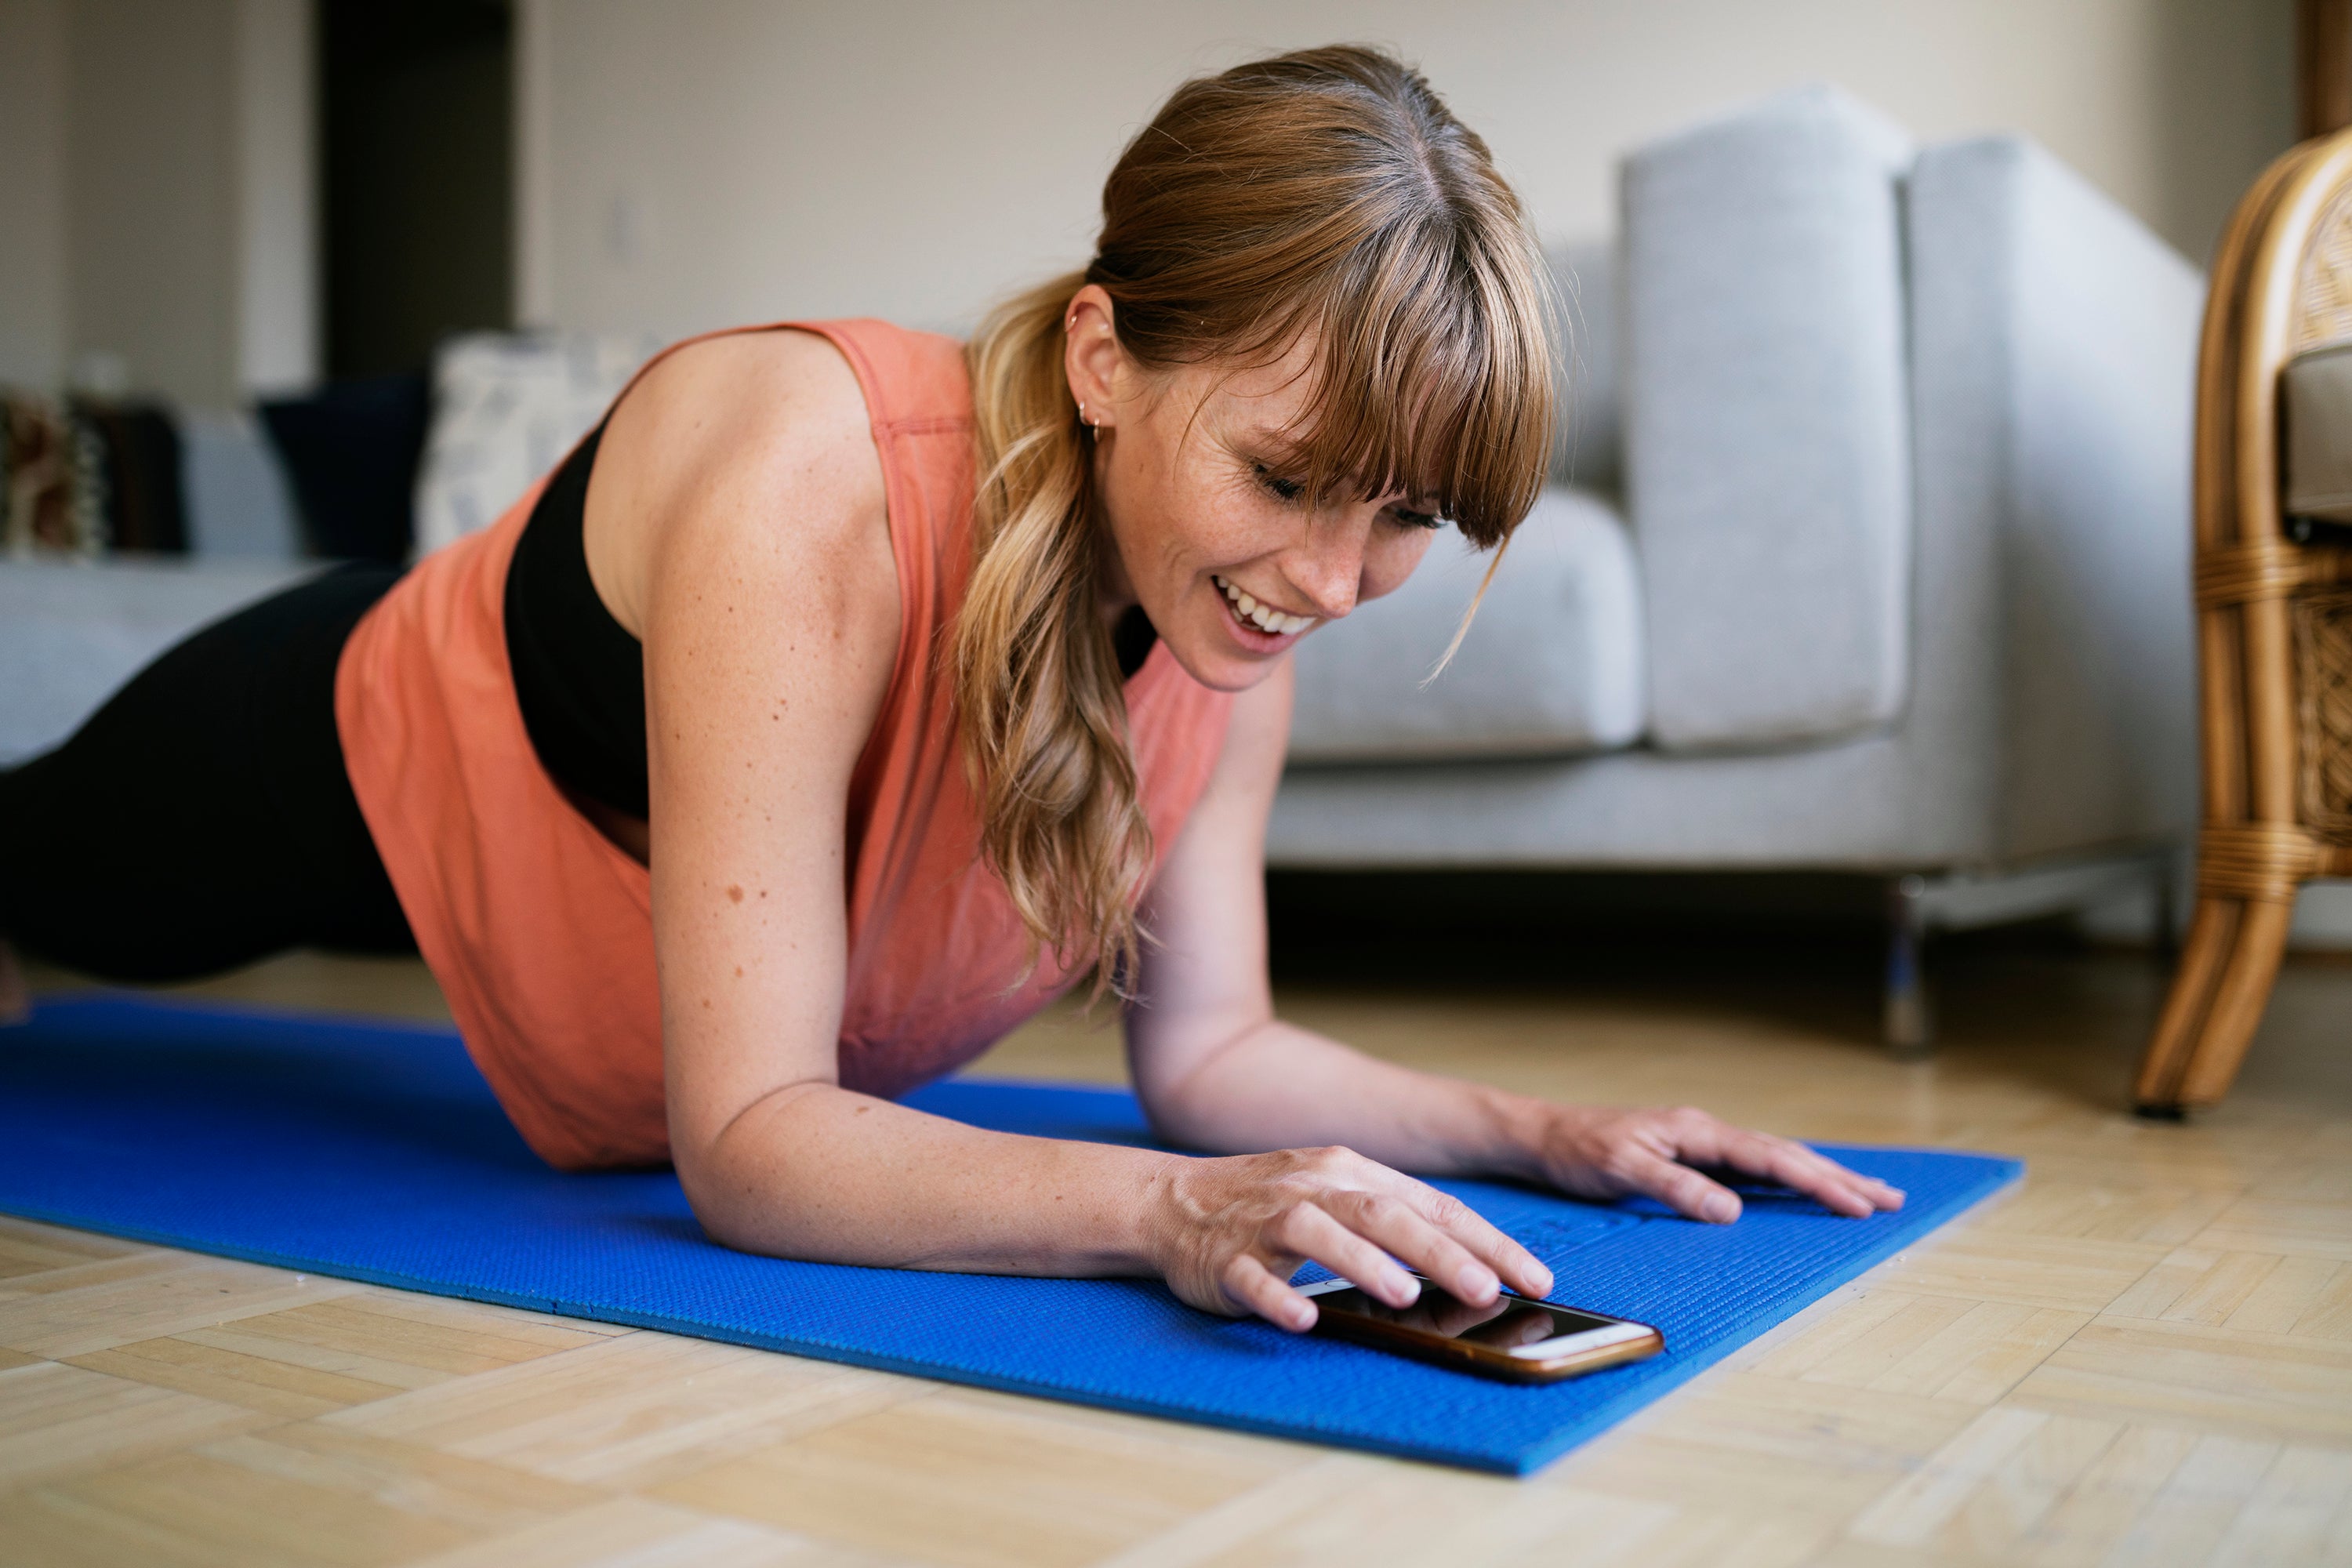 5 Office Exercises to Keep You Healthy While Working From Home